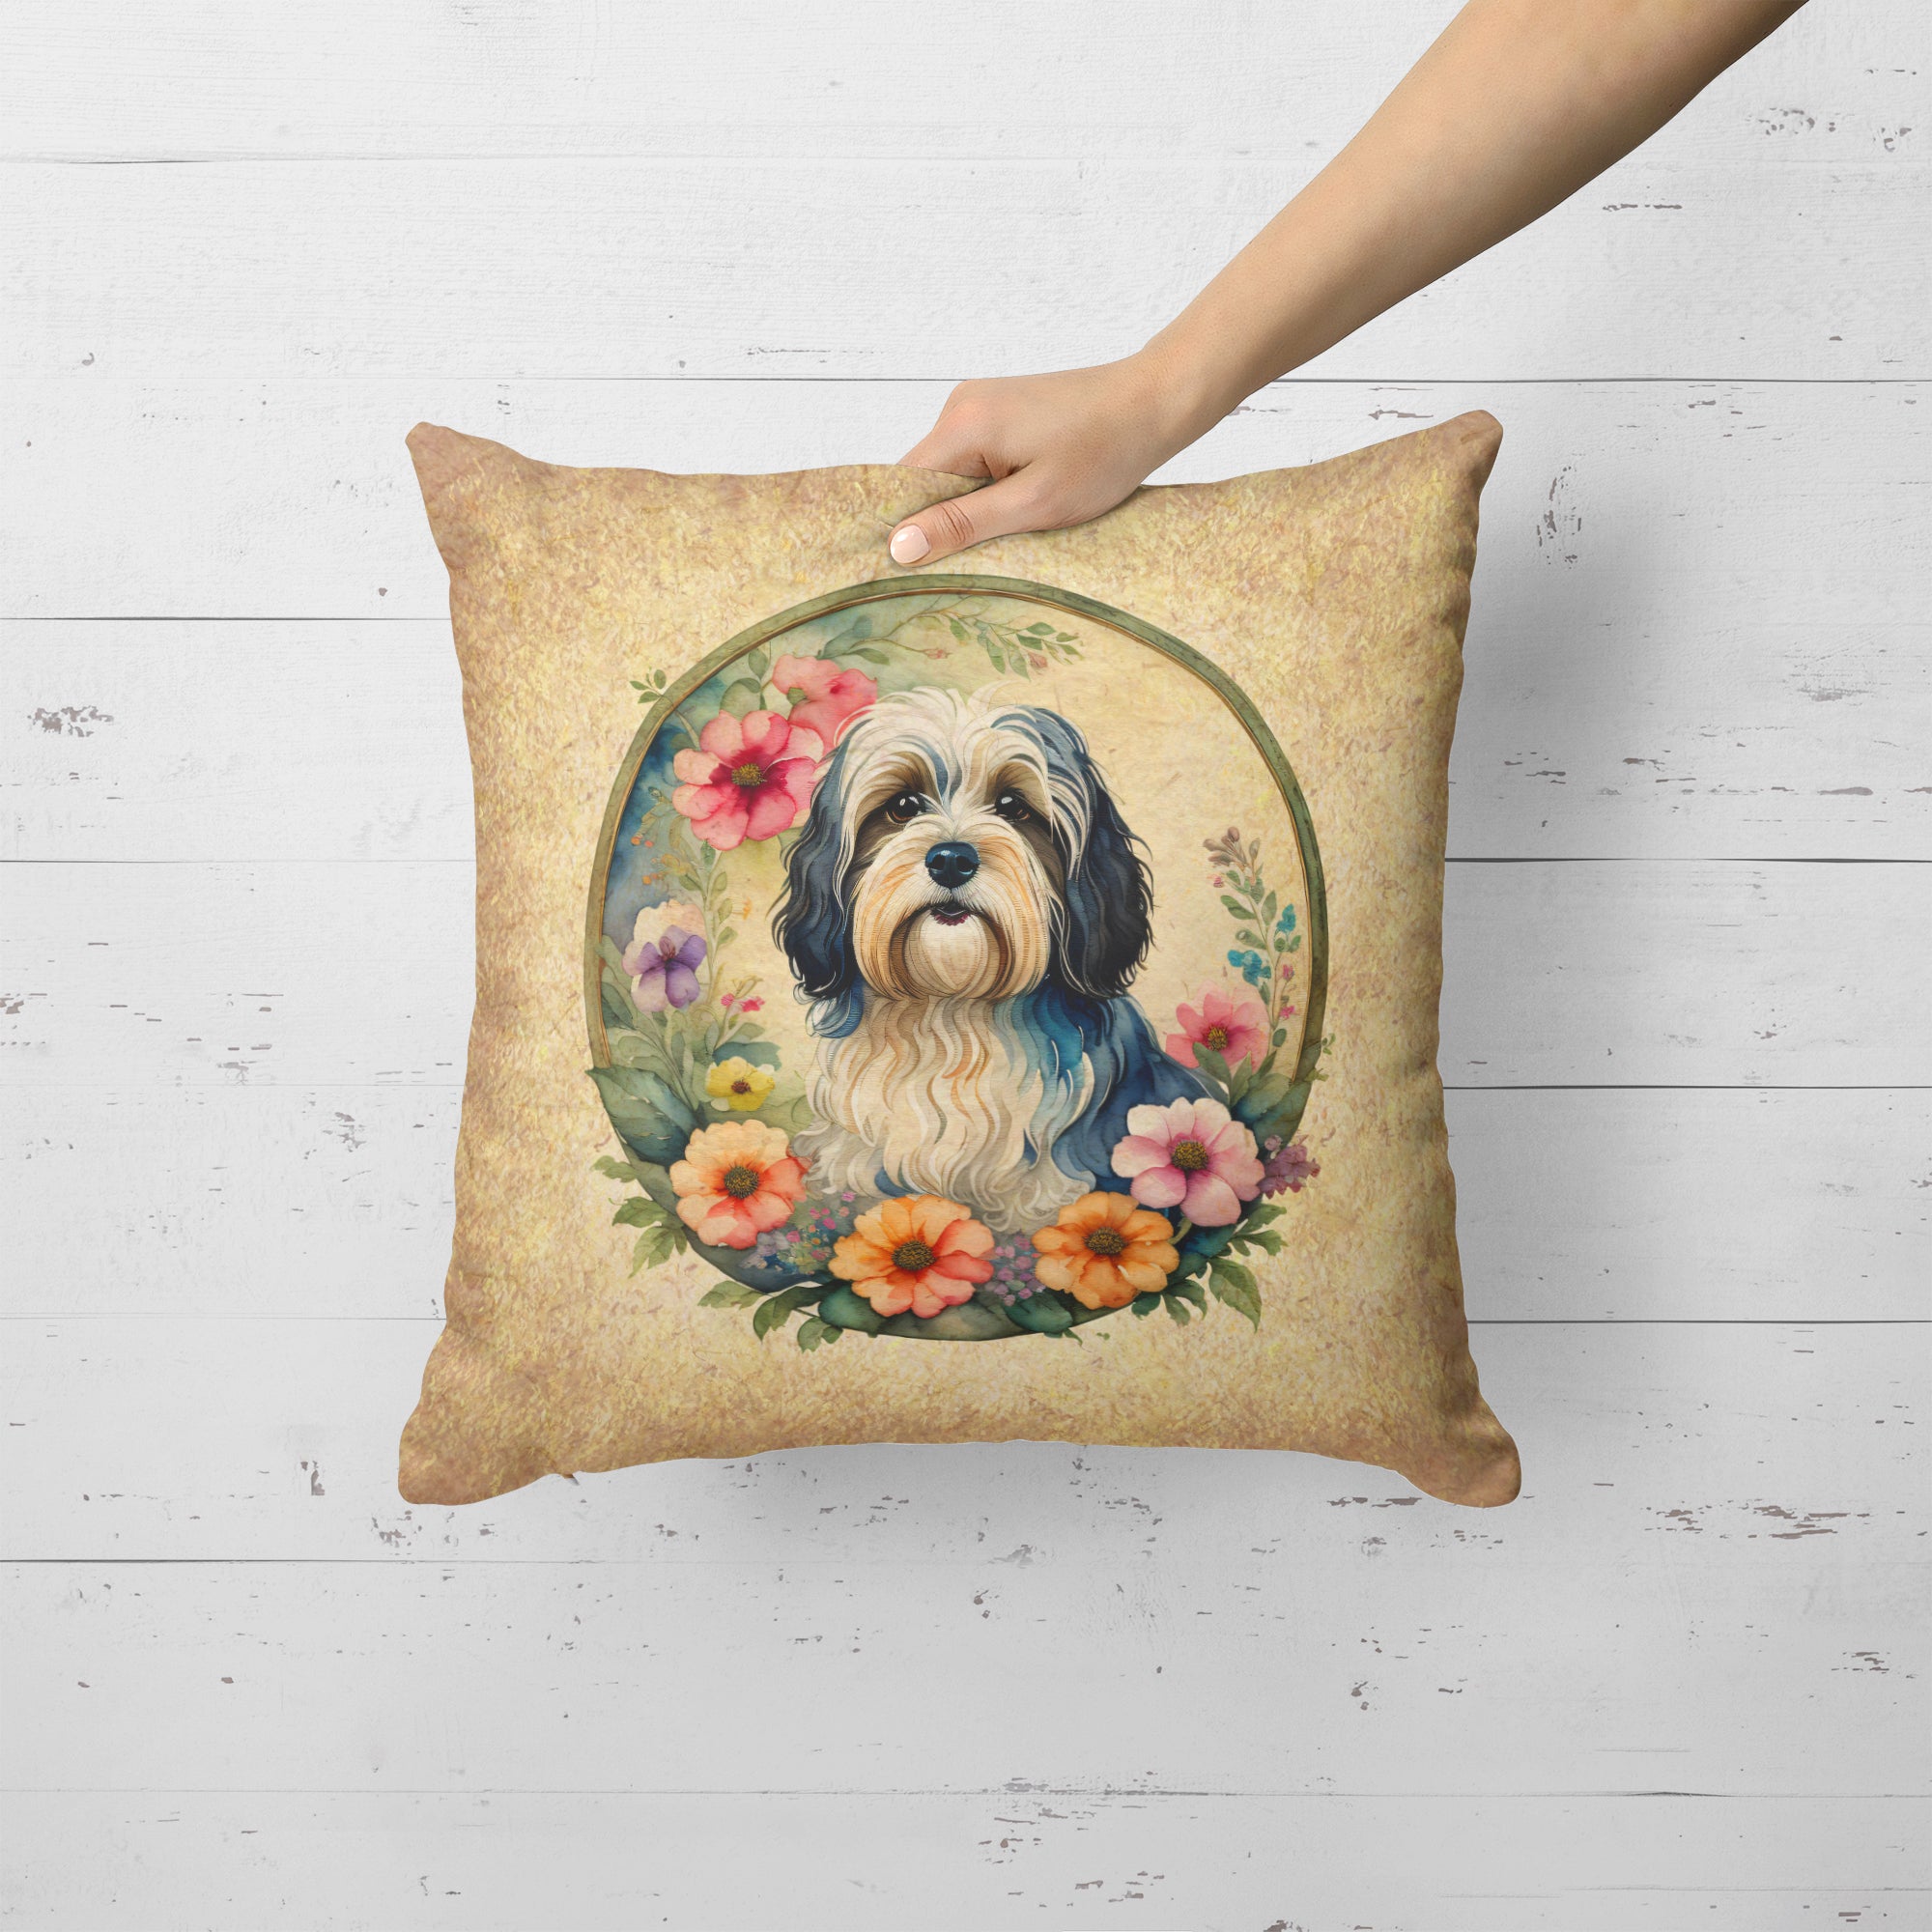 Buy this Havanese and Flowers Fabric Decorative Pillow